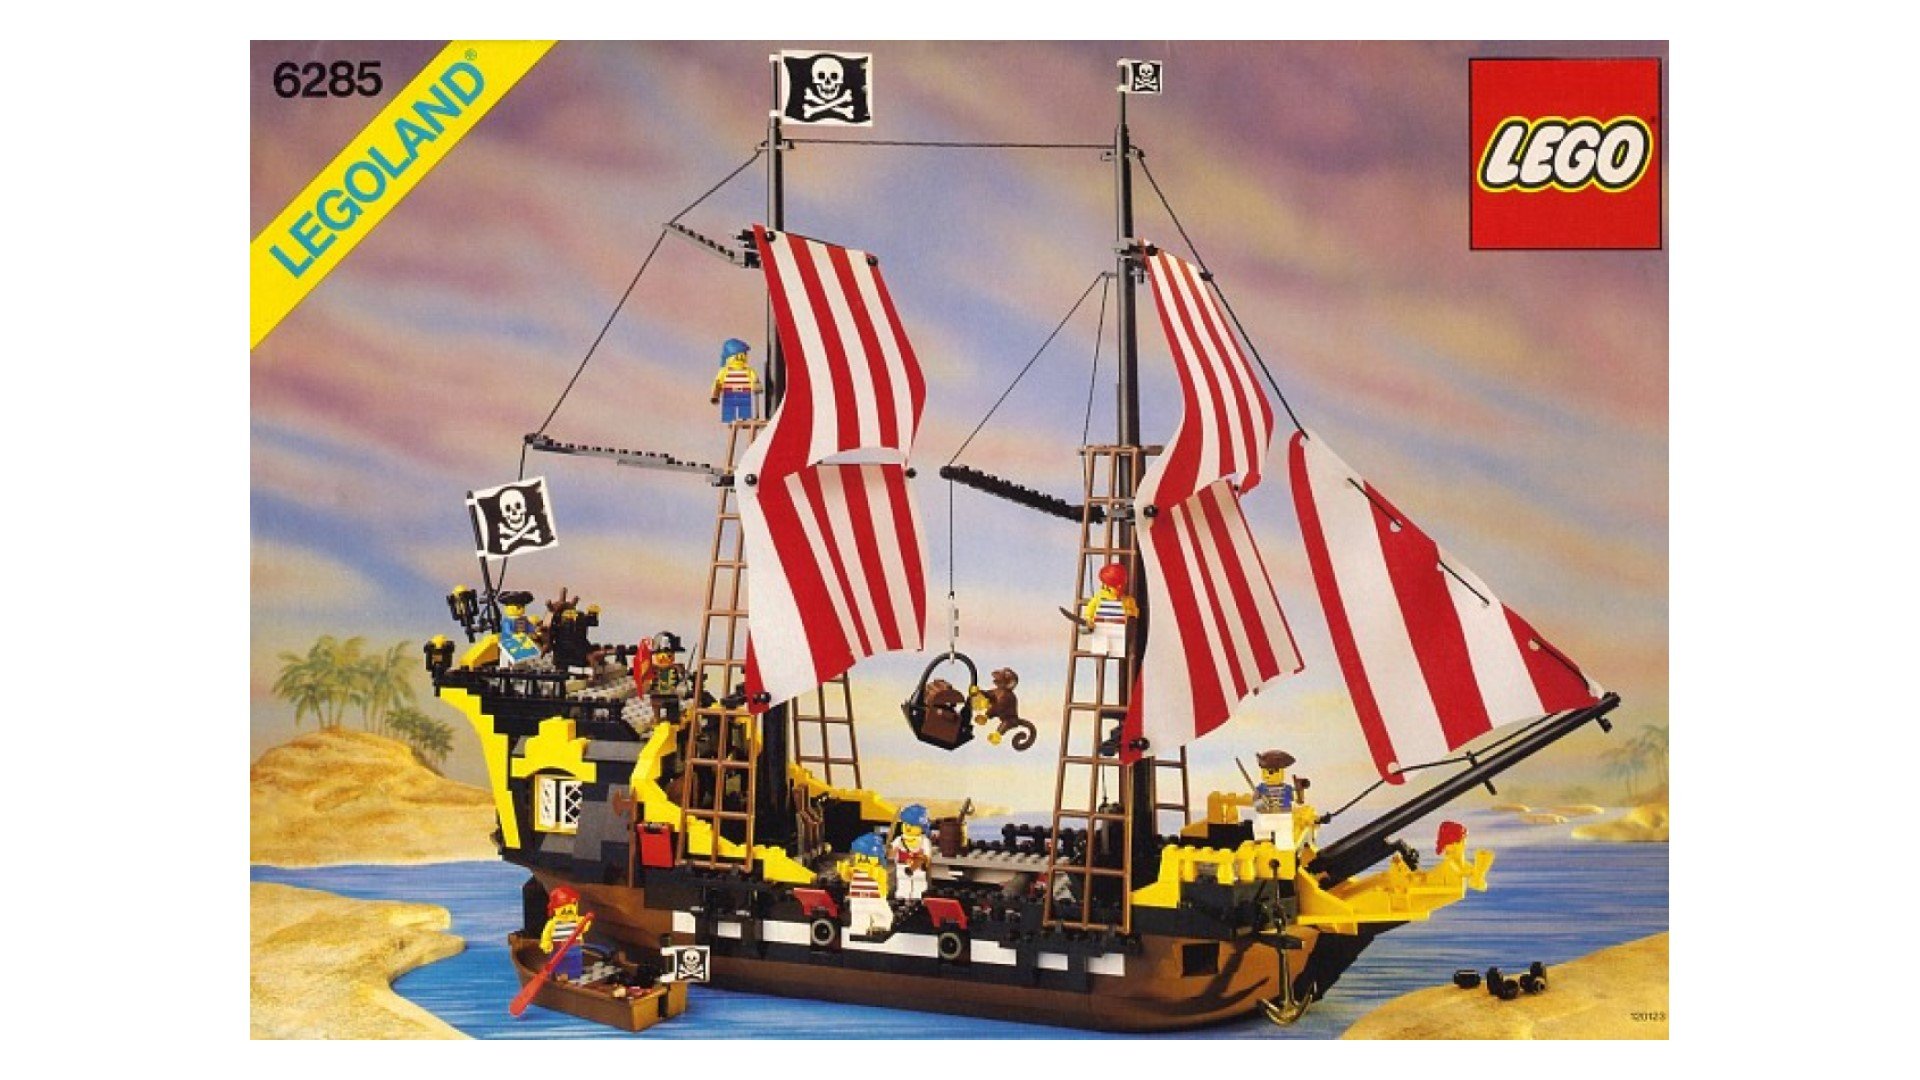 Best Lego sets - a lego pirate ship with striped sails